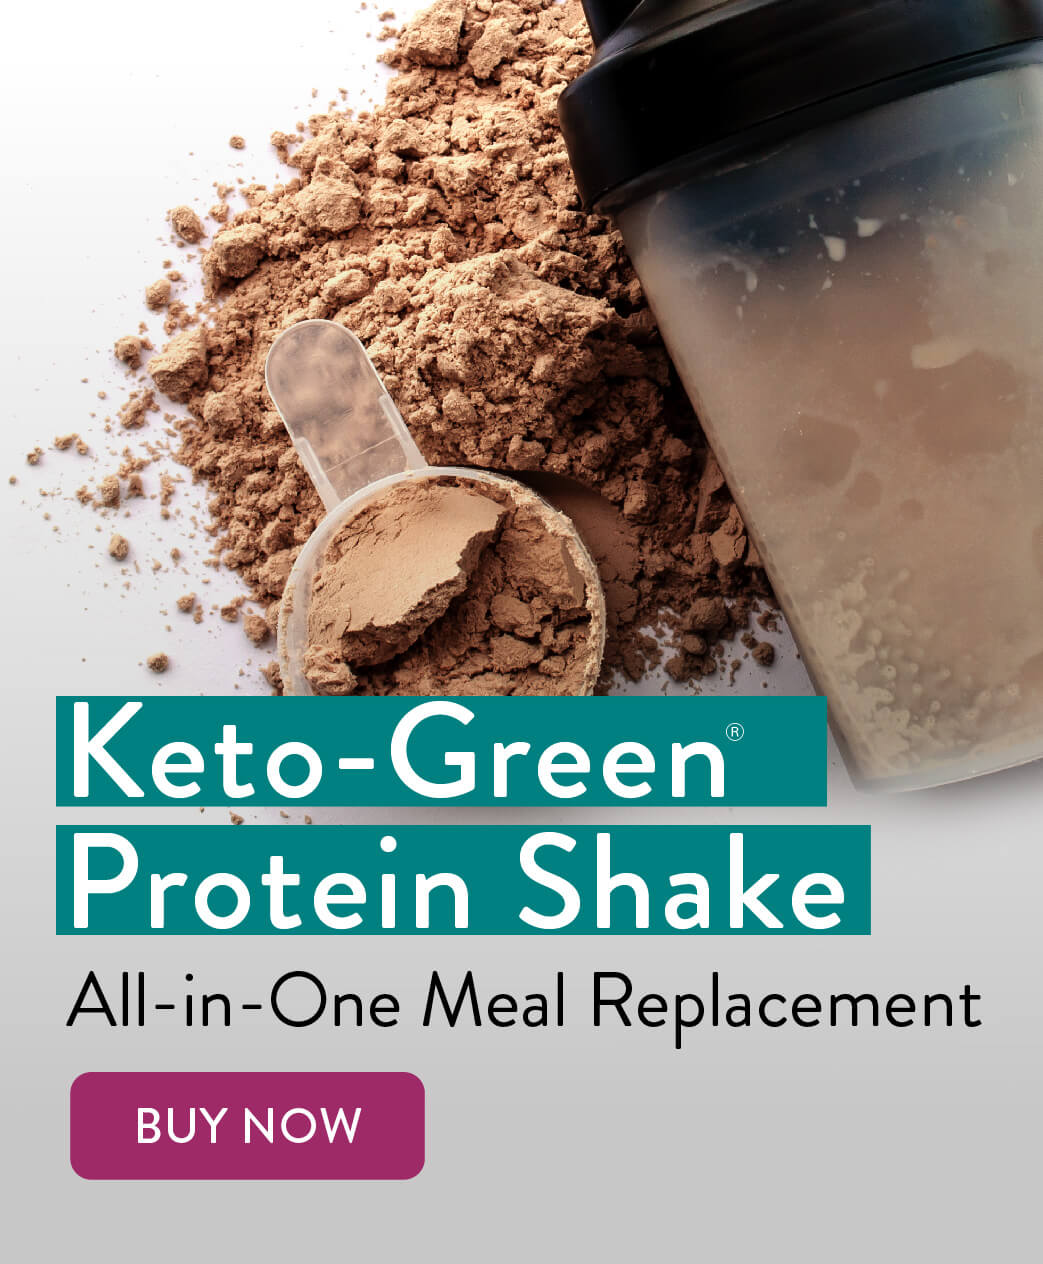 Keto-Green® Protein Shake. All-in-One Meal Replacement. Buy Now